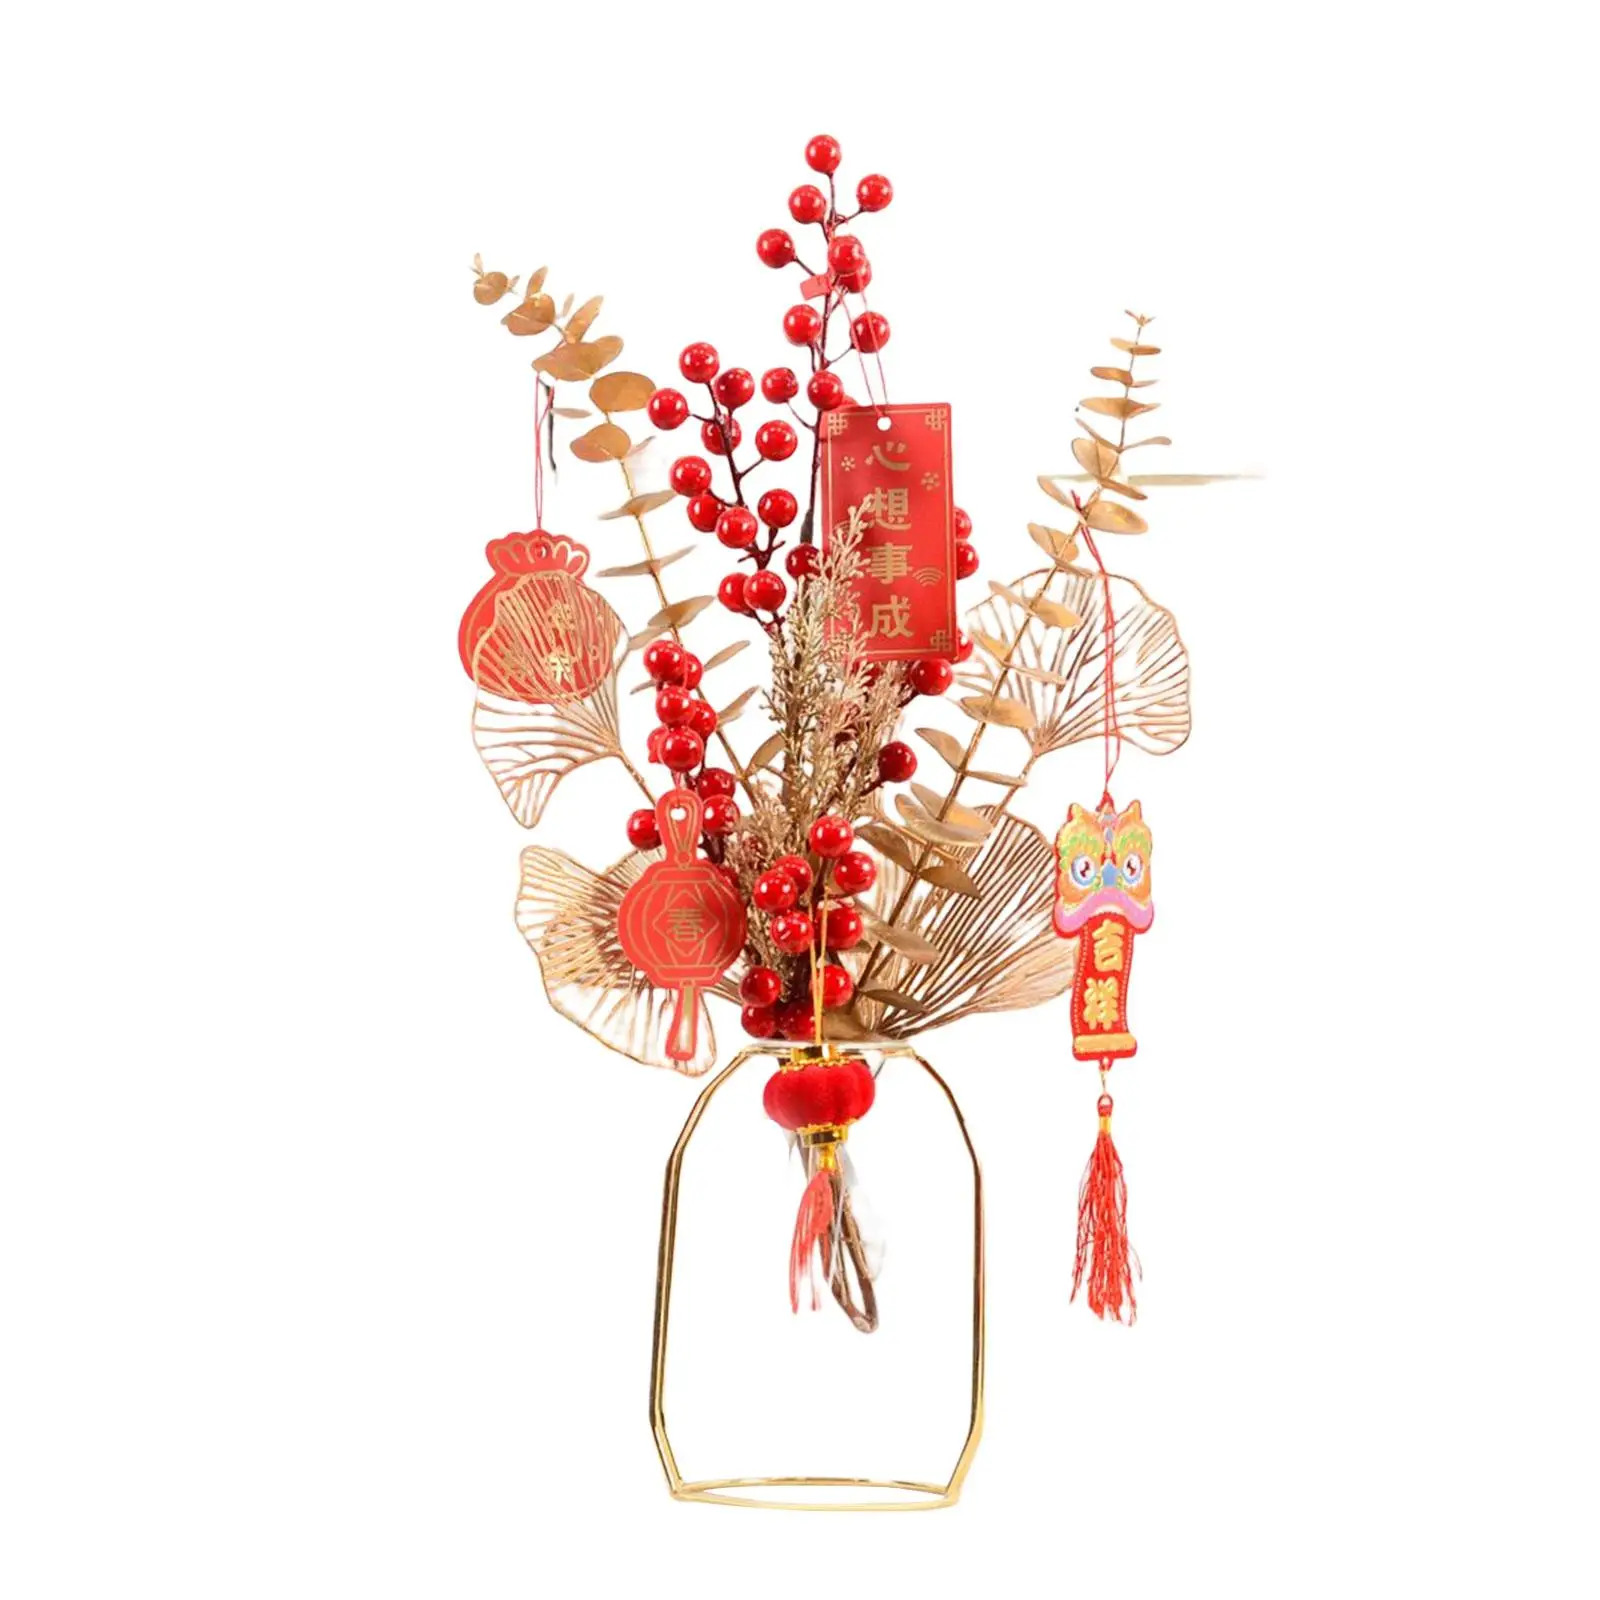 Chinese New Year Decoration Artificial Berries Branches Photo Prop Floral Arrangements Bonsai for Party Restaurant Decoration